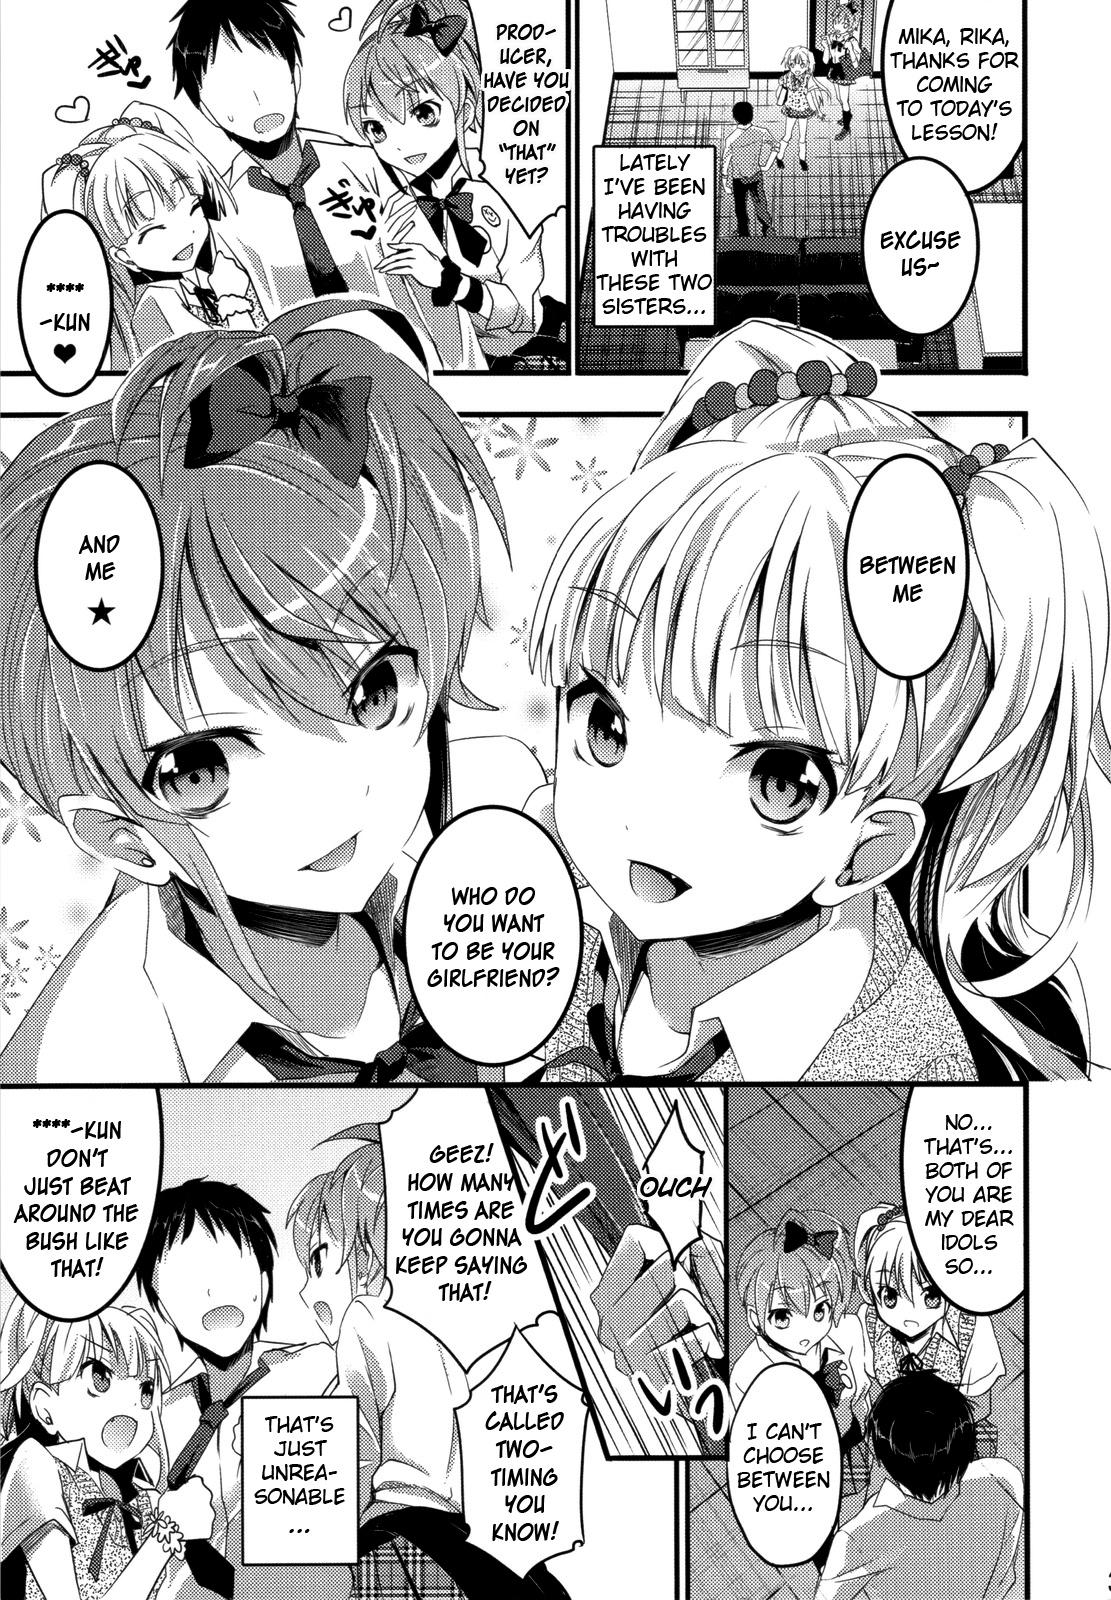 The Jougasaki Sisters' All-out Love Attack + Omake 2